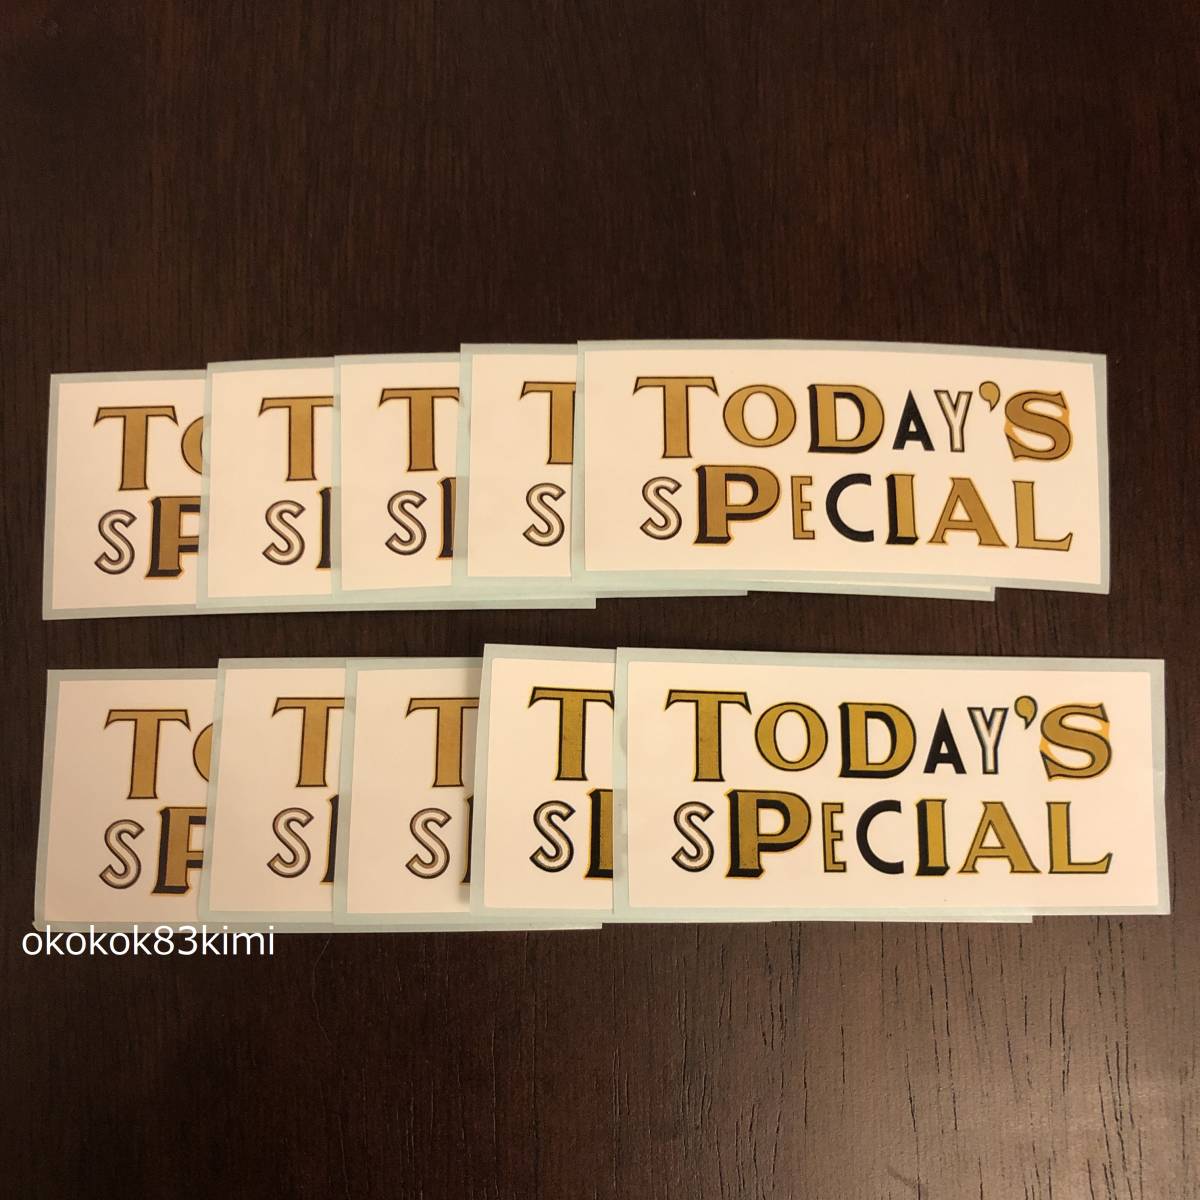  prompt decision * Today z special today\'s special sticker 10 pieces set seal not for sale 